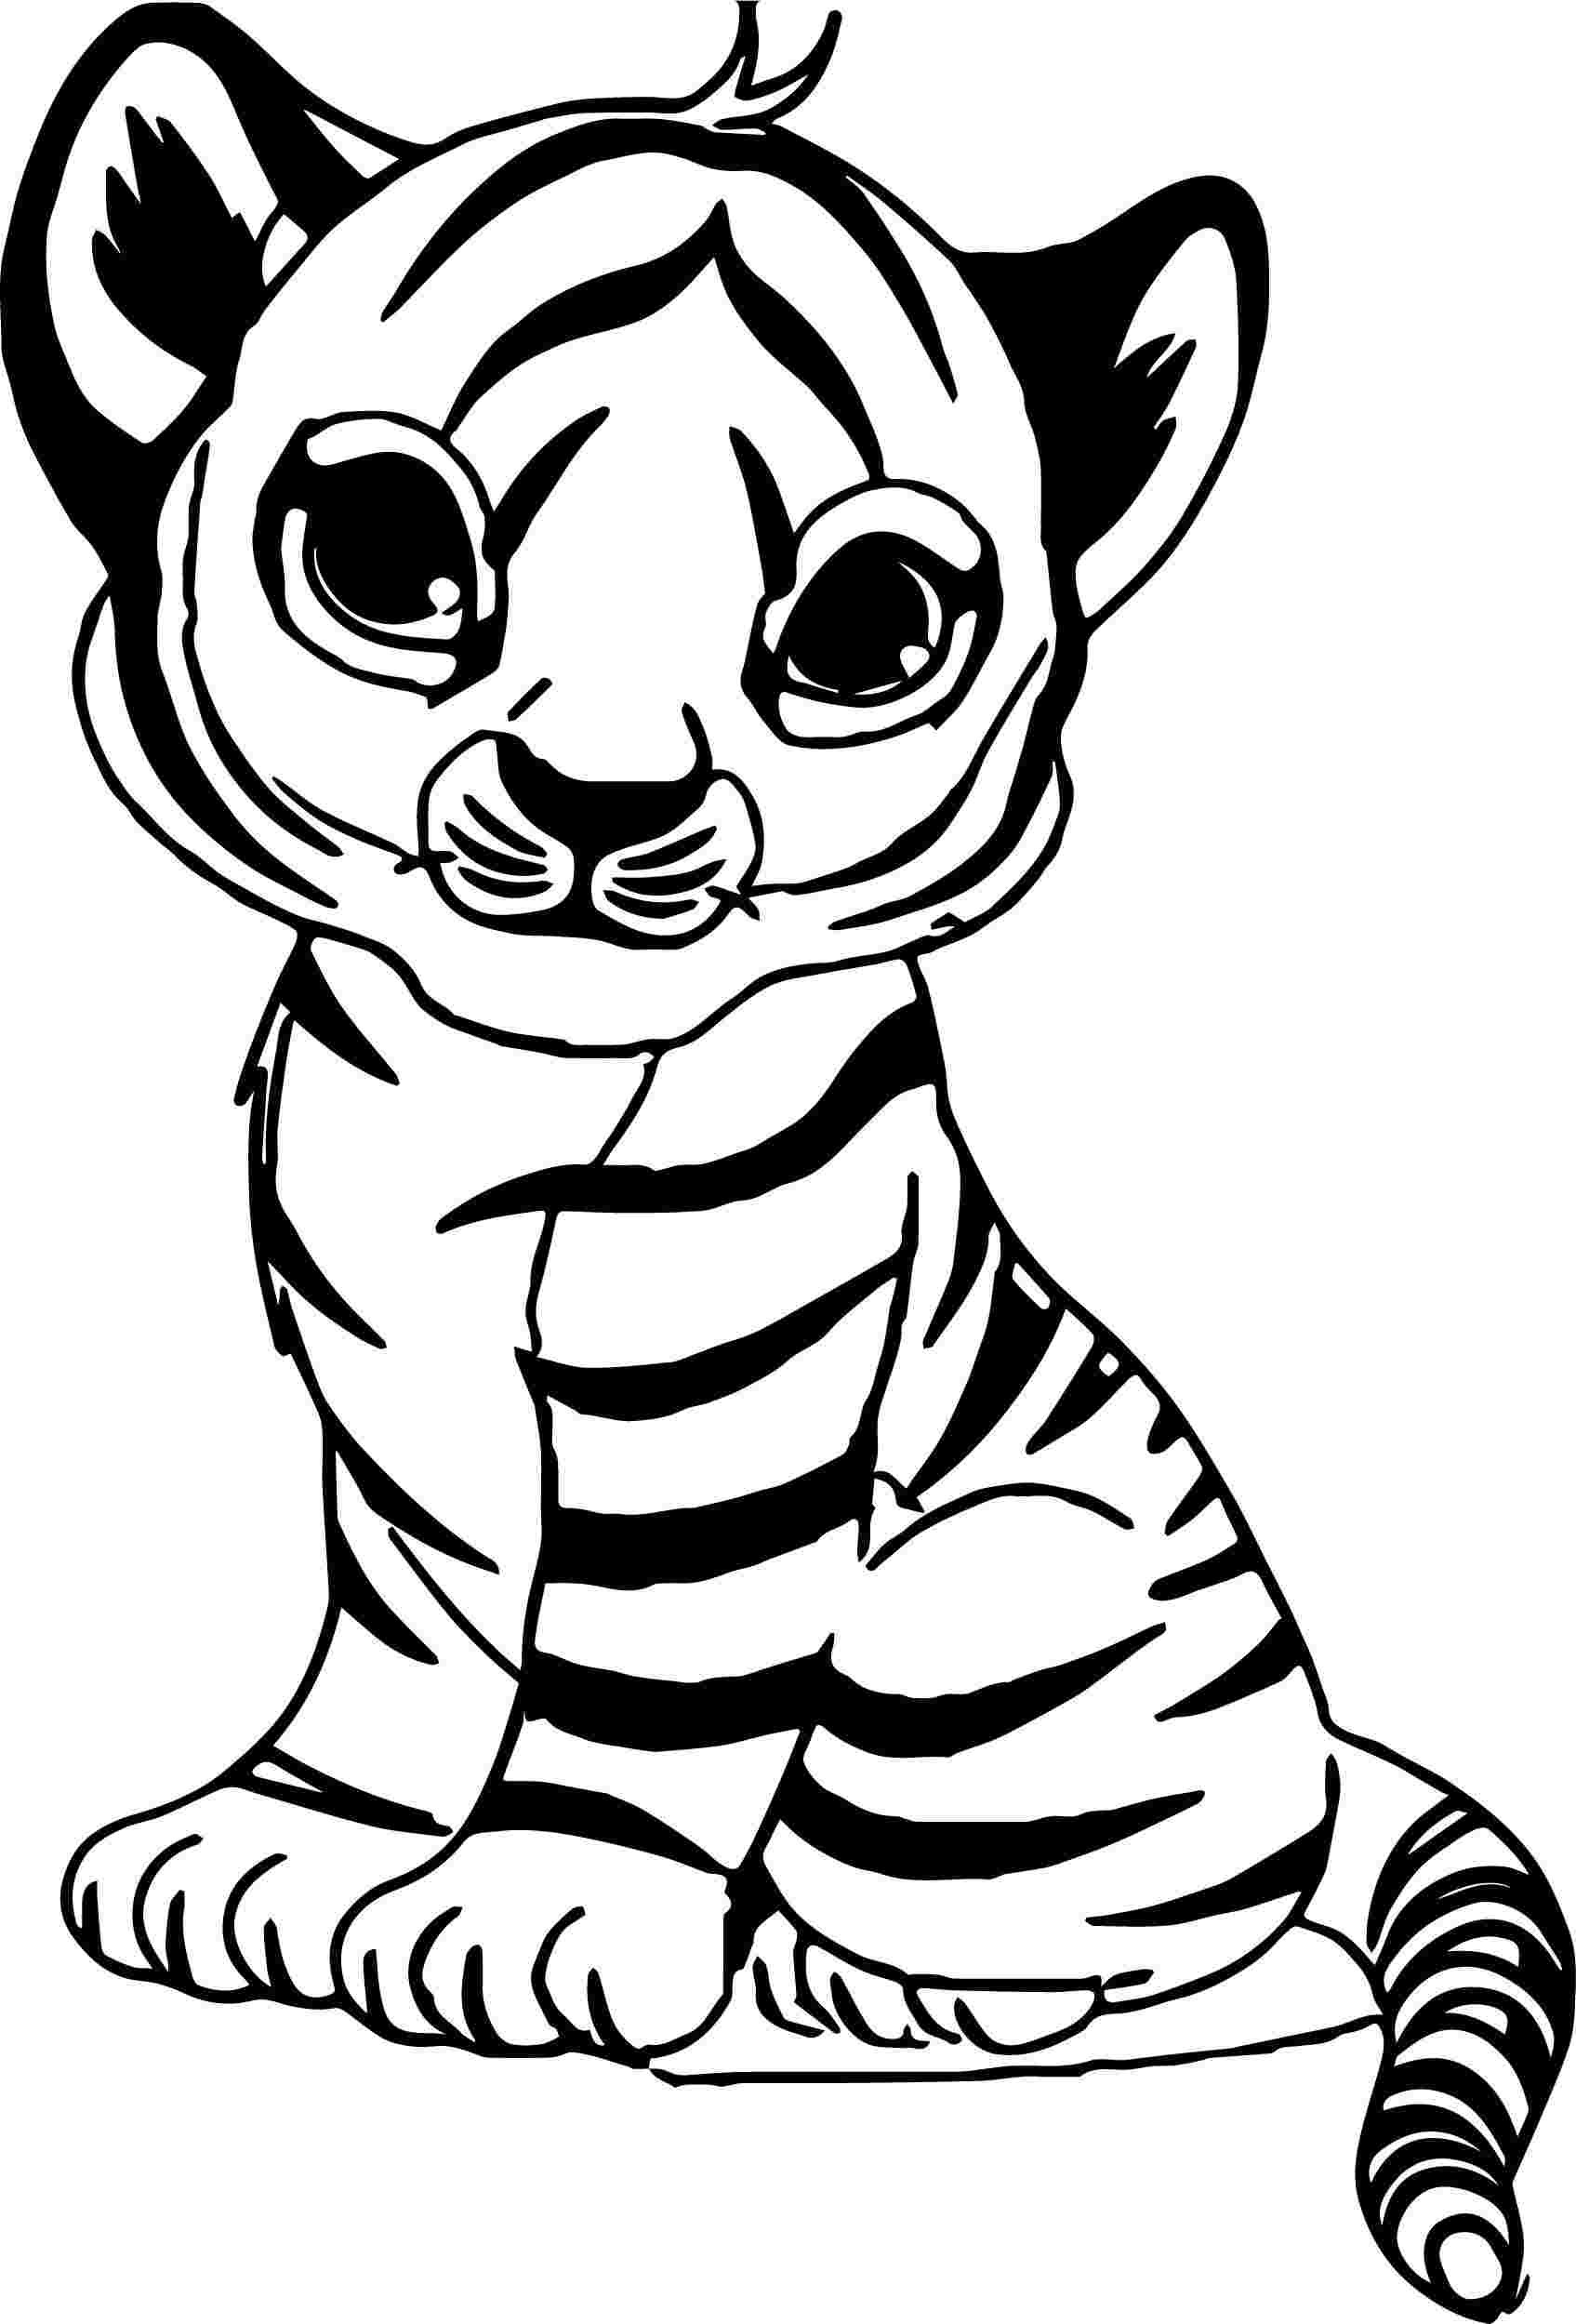 Coloring Baby Animal Luxury Sheets Cute Cute Baby Animal Coloring Pages  coloring pages cute animal pictures to print printable baby animal pictures  cute baby animals to color I trust coloring pages.